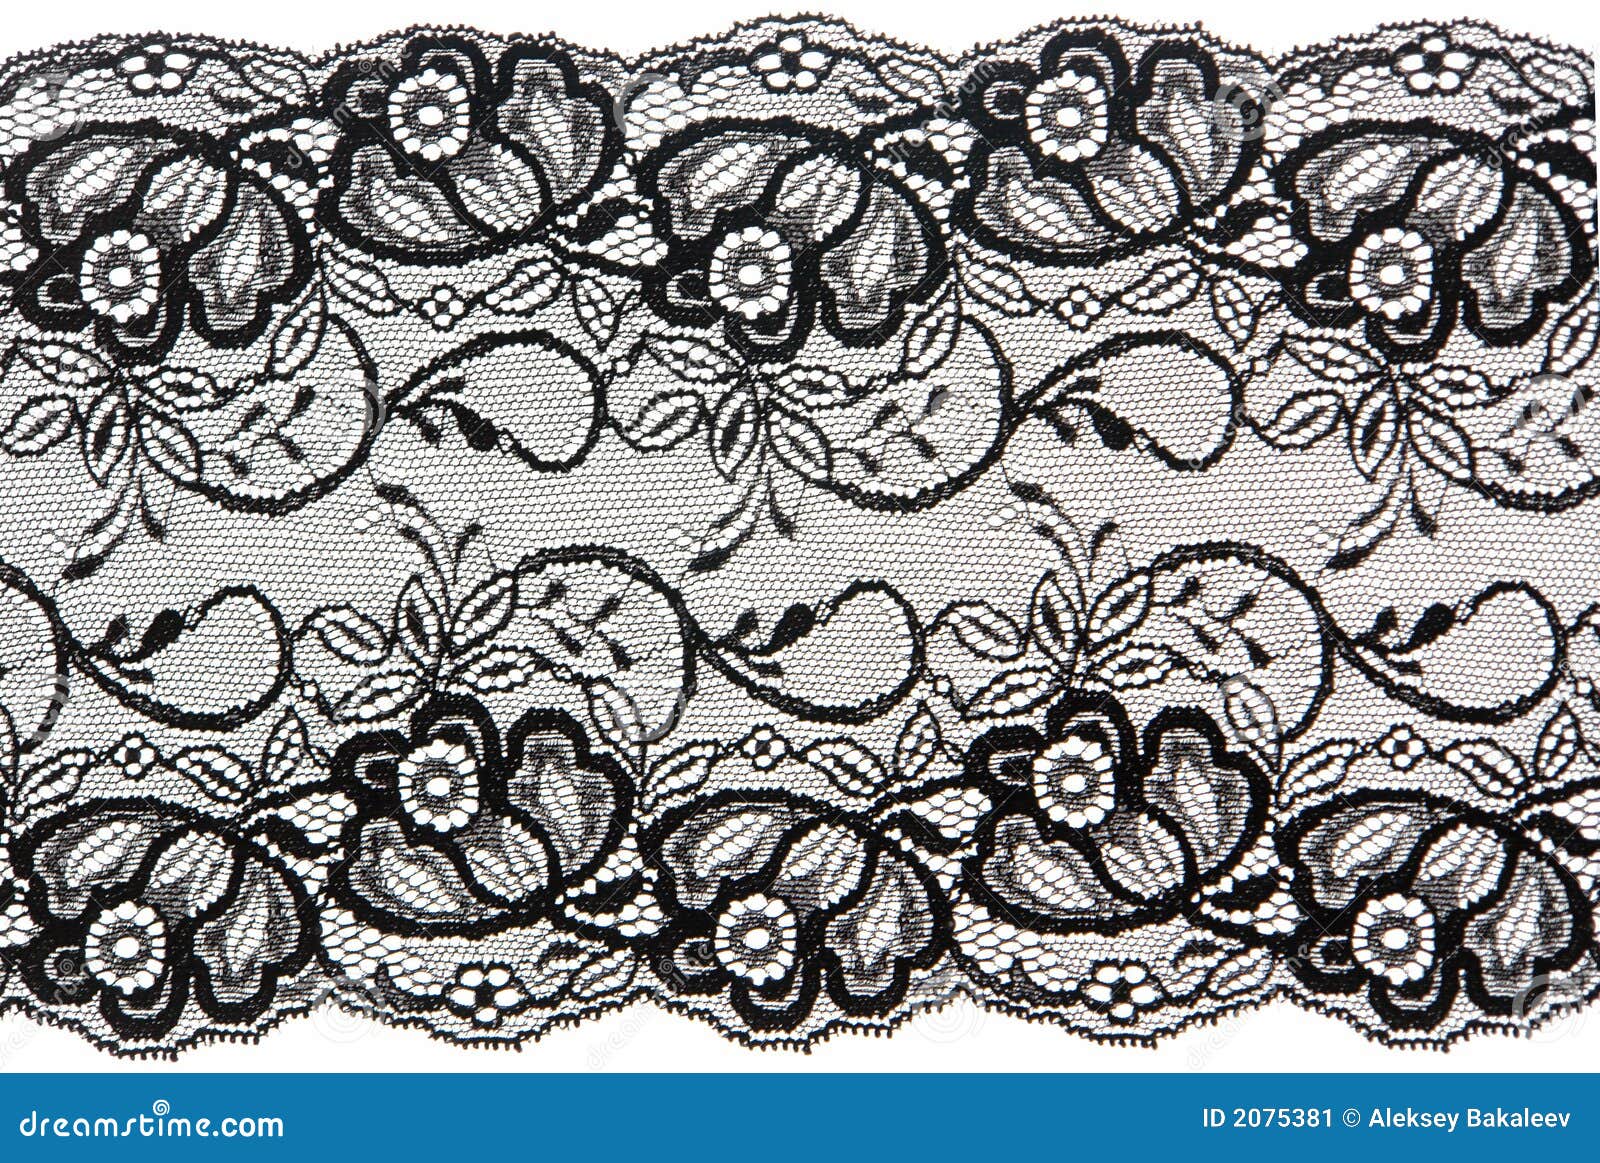 Black lace stock image. Image of design, flower, textured - 2075381